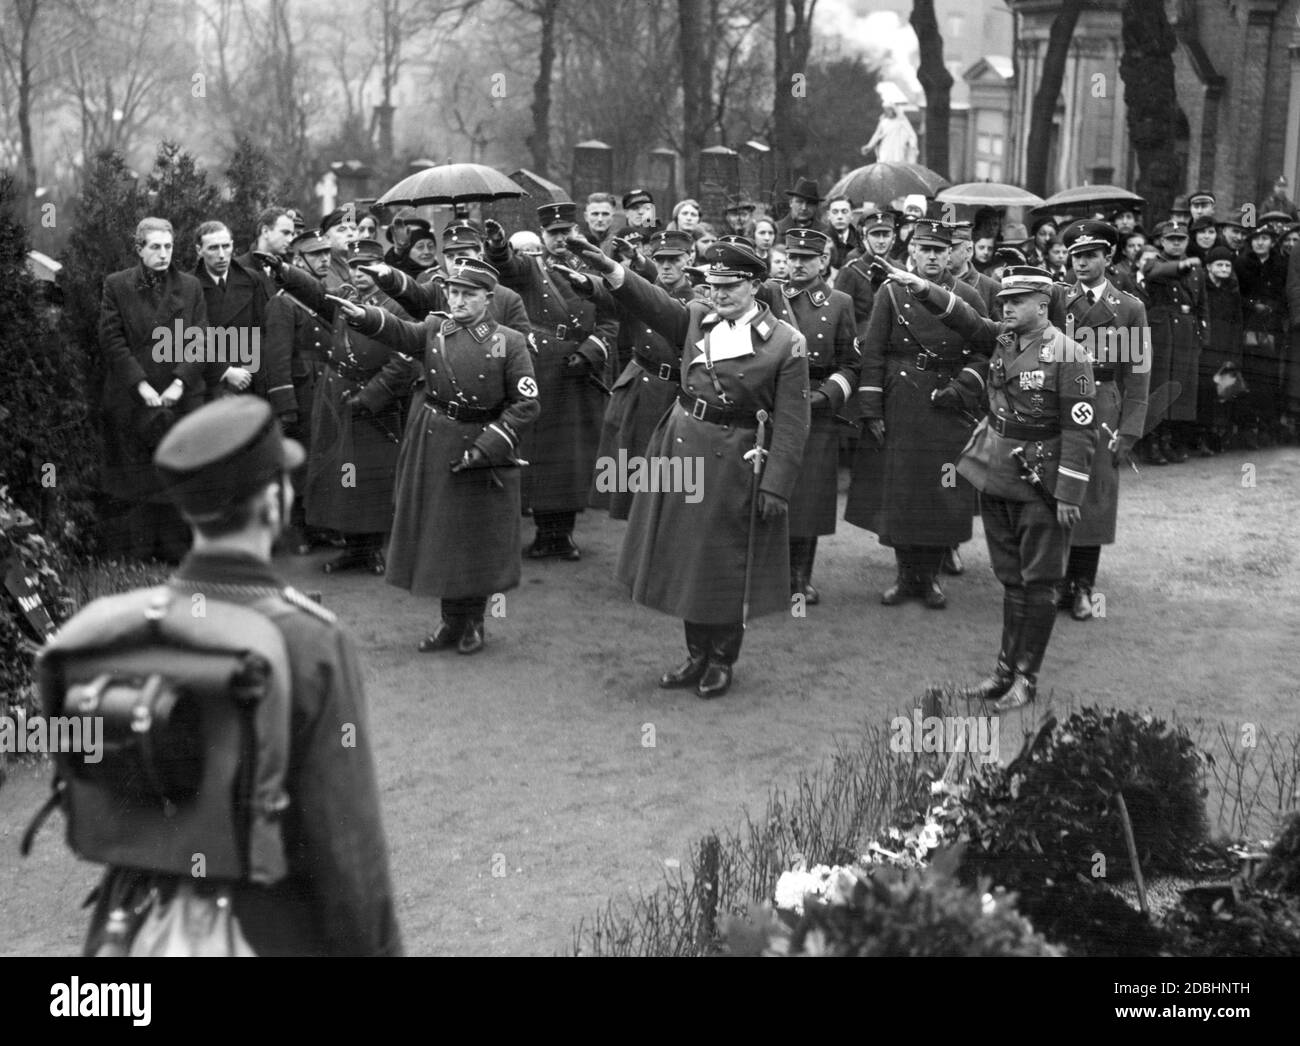 Hermann Goering commemorates the SA member Horst Wessel, stylized as a martyr of National Socialism, with the Nazi salute. Wessel was buried at the St. Nicholas and St. Mary Cemetery in Prenzlauer Berg. The picture shows on the right side of Goering the SA-Obergruppenfuehrer Dietrich von Jagow, on the left side the Obersturmbannfuehrer Fritz Schlageter. Stock Photo